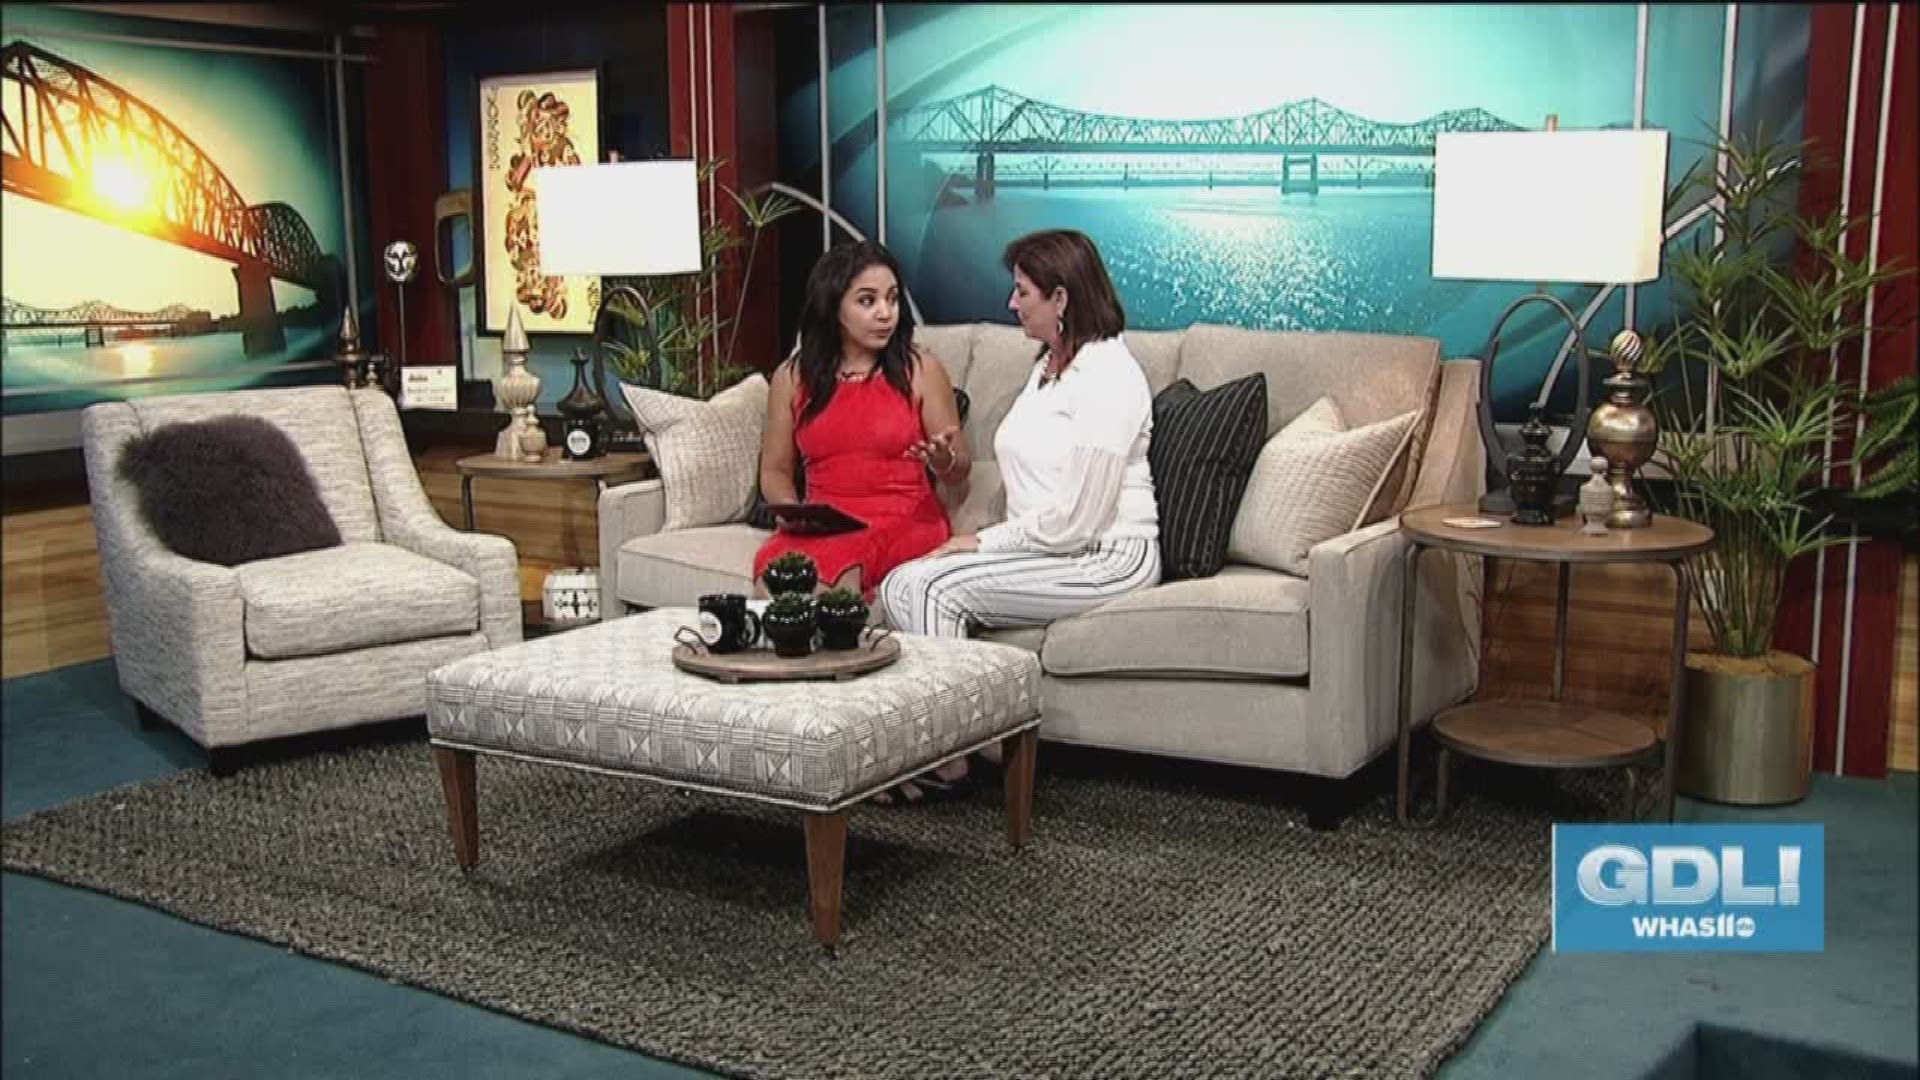 Burdorf Interiors gives the Great Day Live set a makeover every season by providing furniture and styling, and then giving the previous set away to a lucky viewer. Velma Watkins from Burdorf Interiors stopped by Great Day Live for the big reveal. To register for a chance to win, just go to 401 North English Station Road in Louisville, KY. For more information, go to Burdorf.com.